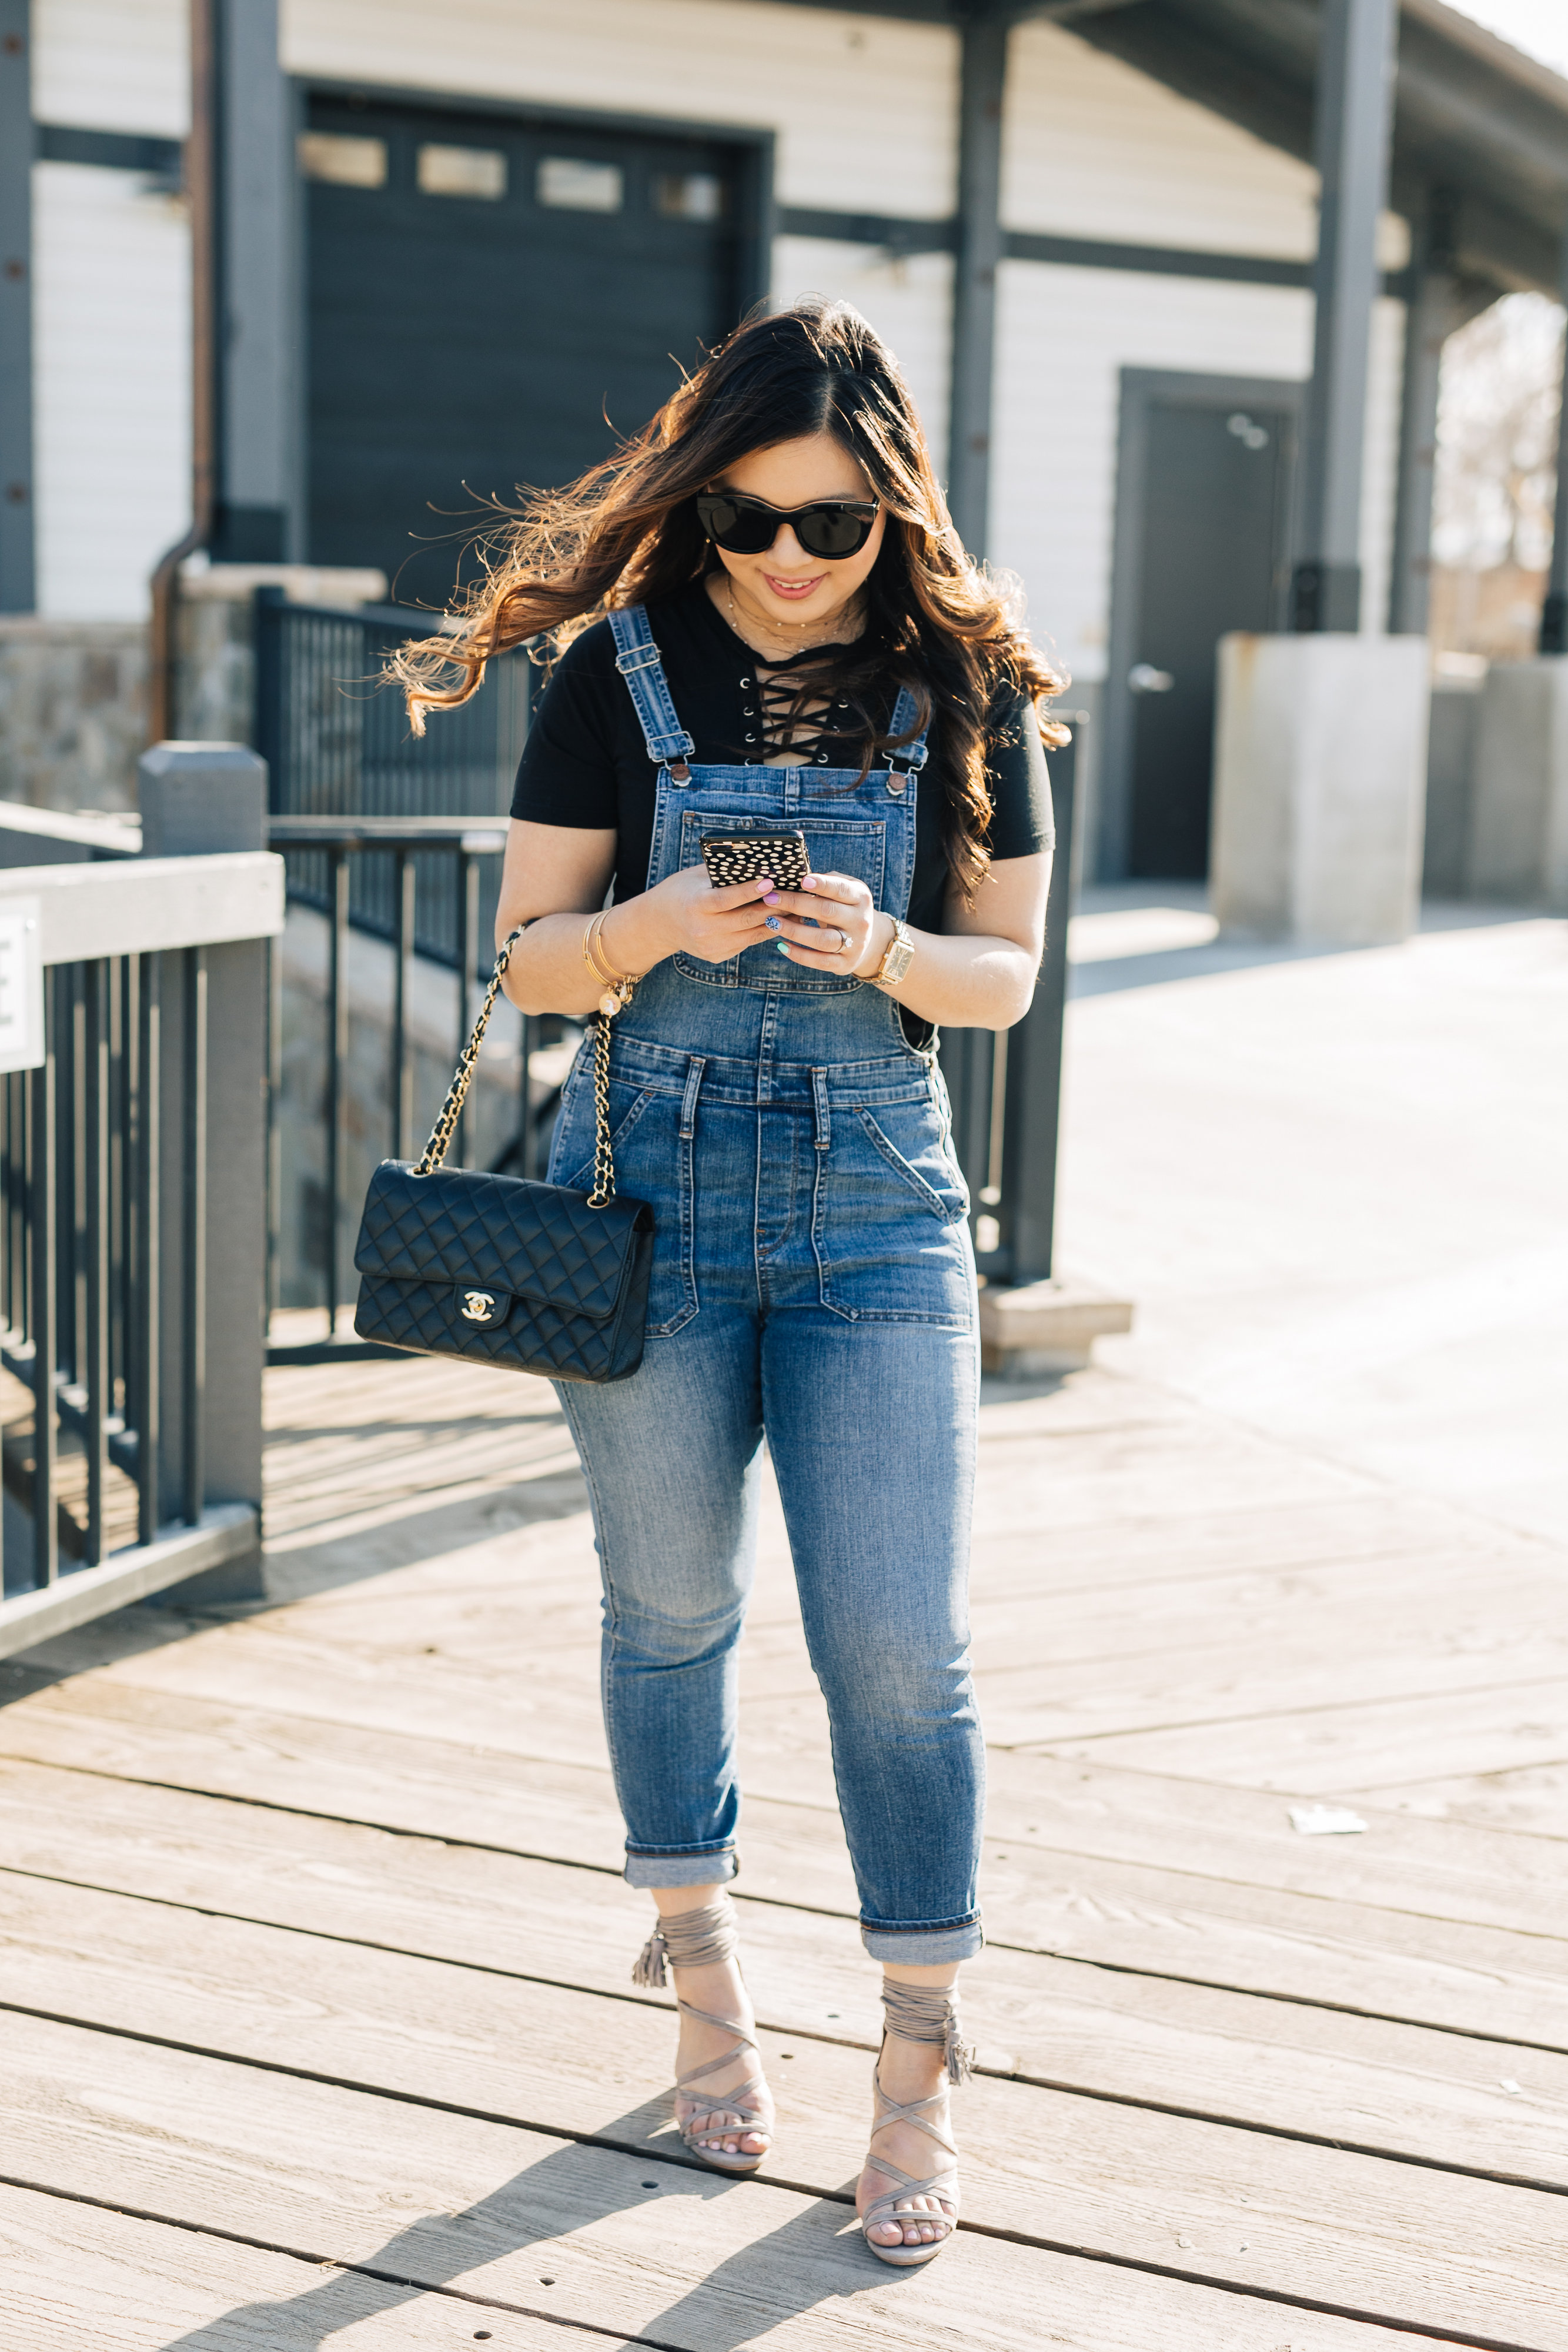 5 Chic Ways To Style Denim Overalls by popular Utah style blogger Sandy A La Mode